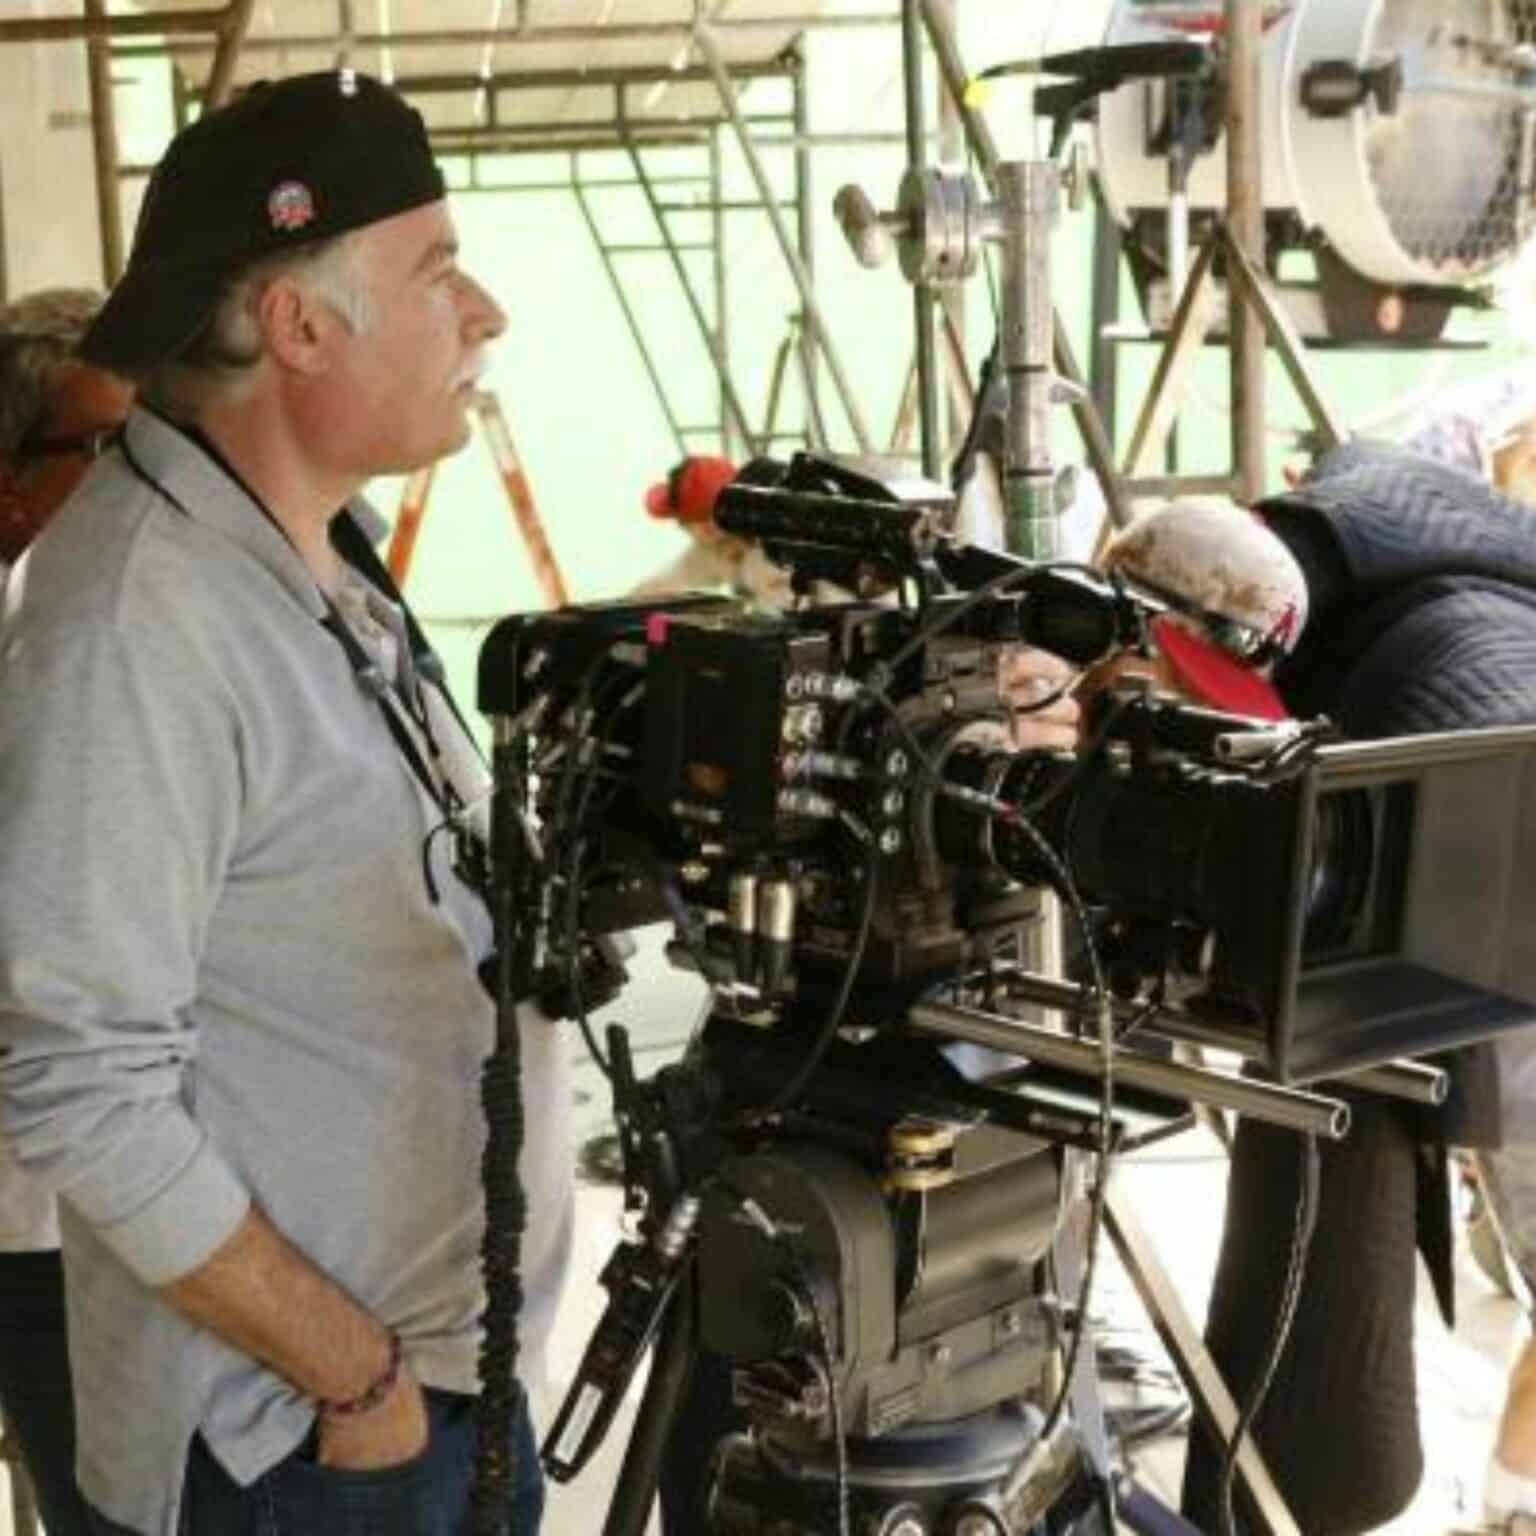 3-Time Emmy Award Winning Cinematographer Gary Baum ASC Crafting Cinematic Excellence Fostering Collaborations Among Showrunners, Directors, Production Designers, and Key Departments for a Distinct